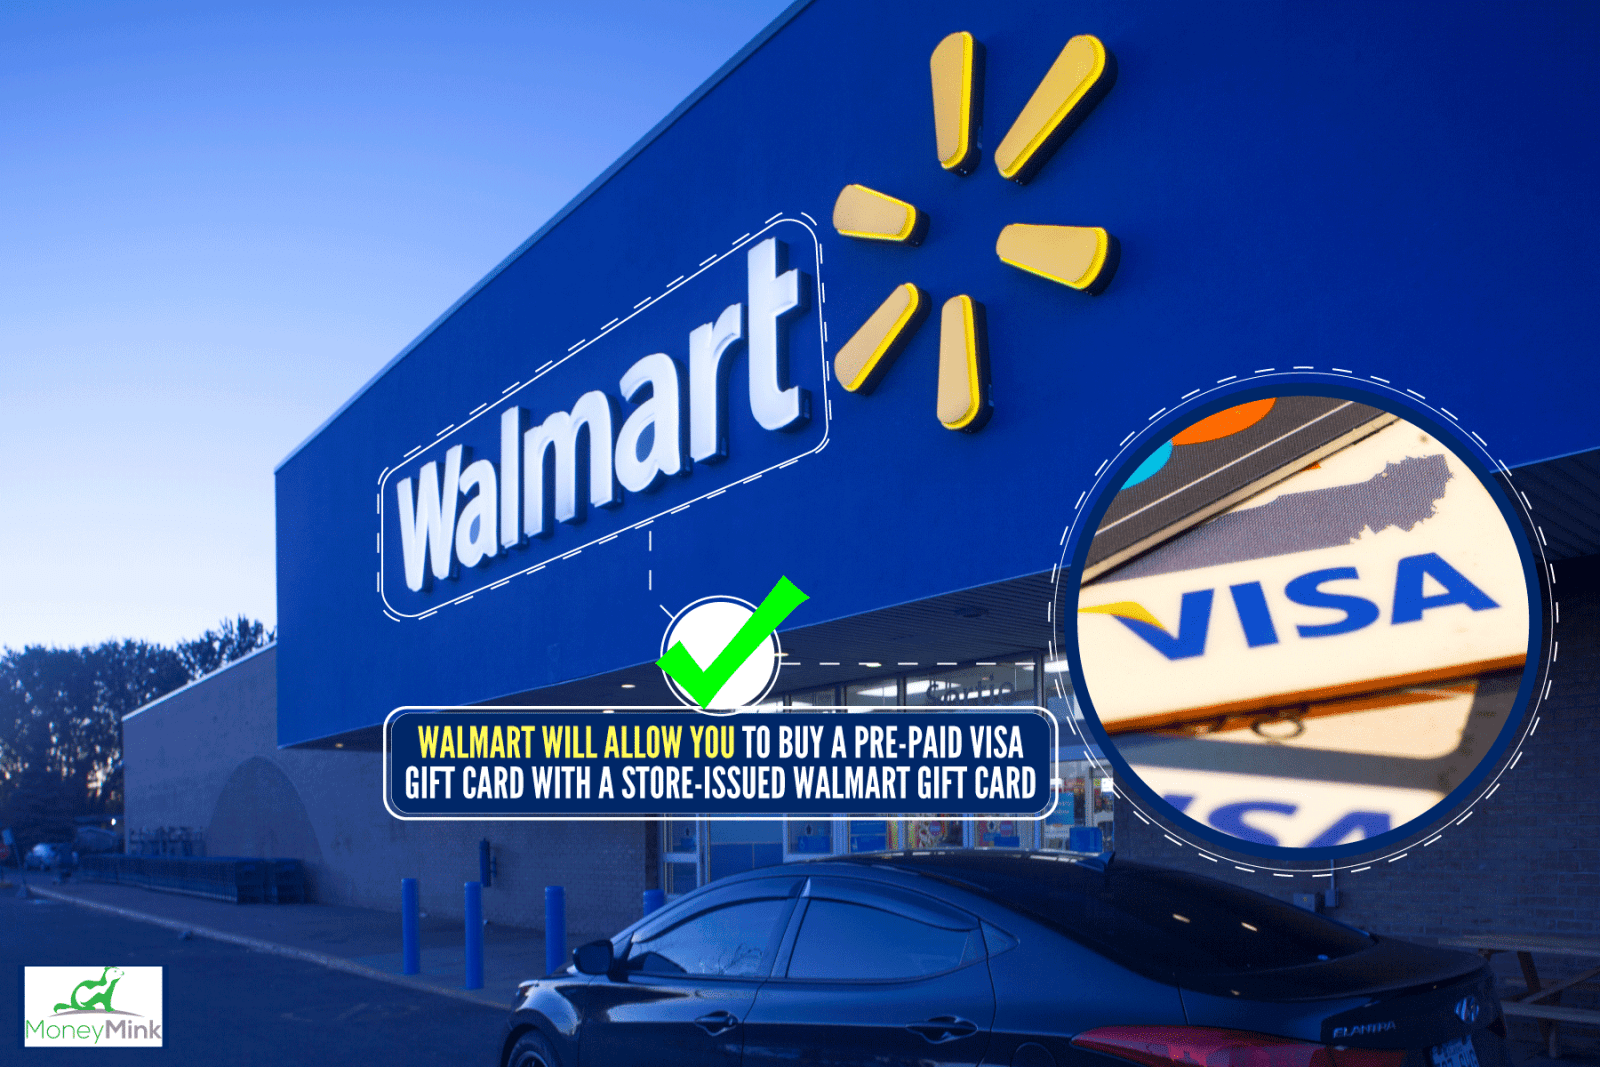 Walmart store photographed at dusk, Can You Buy A Visa Gift Card With A Walmart Gift Card?